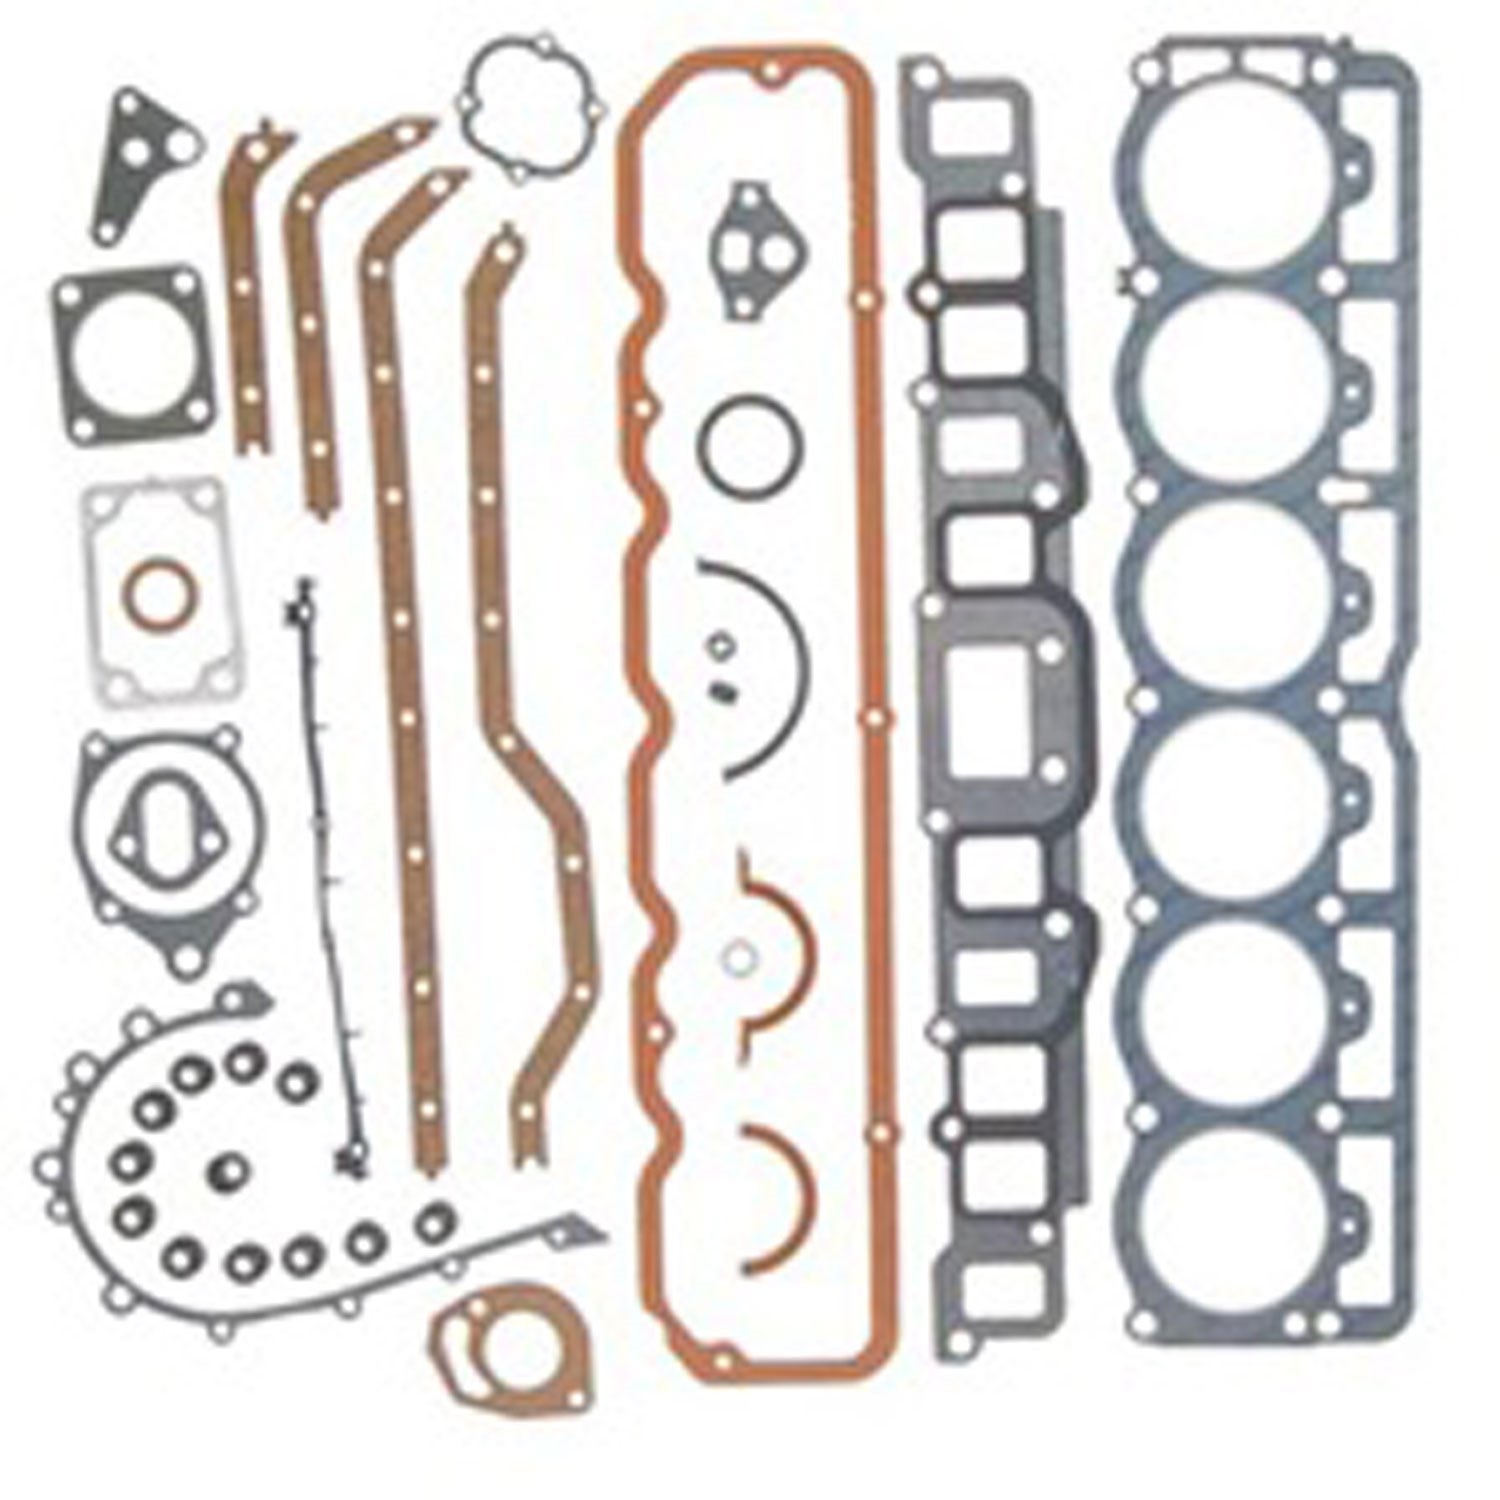 This full engine gasket set from Omix-ADA fits the 4.2L engine in 81-90 Jeep CJs and Wranglers.